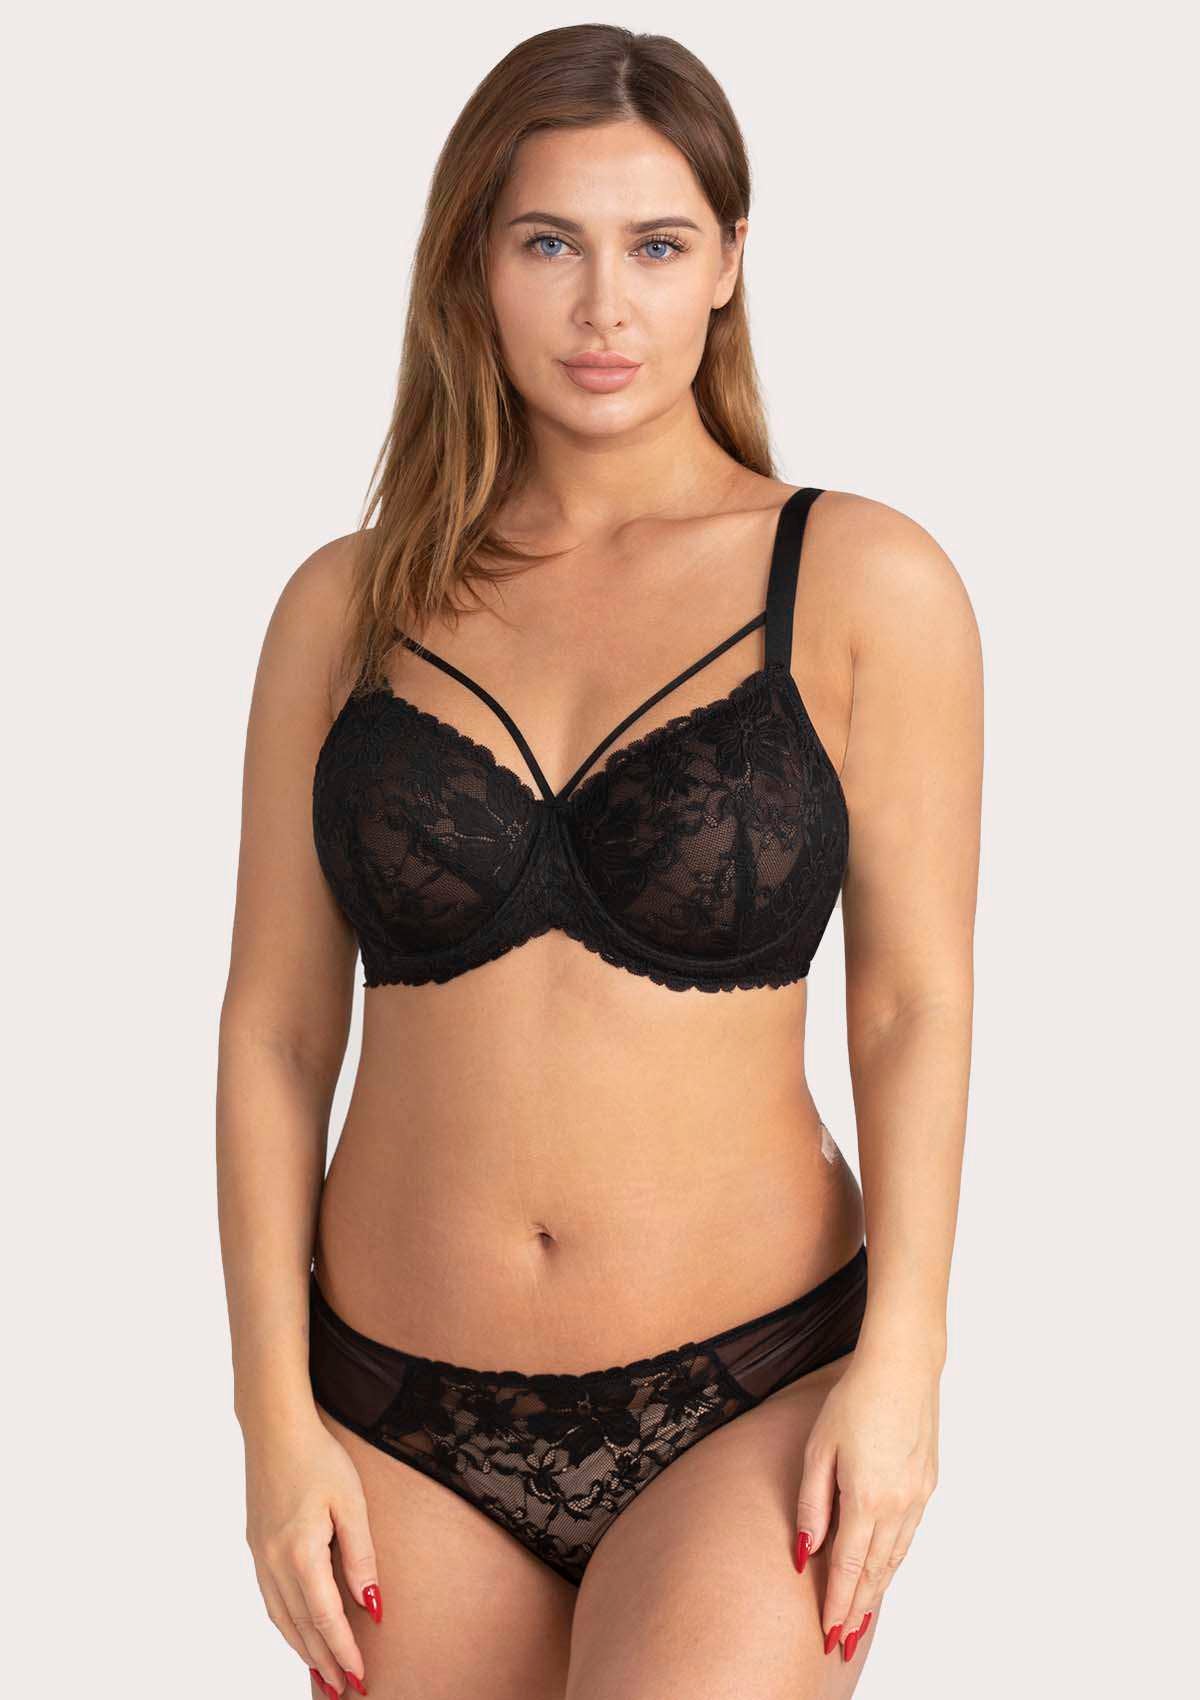 HSIA Pretty In Petals Lace Bra And Panty Set: Non Padded Wired Bra - Black / 44 / G